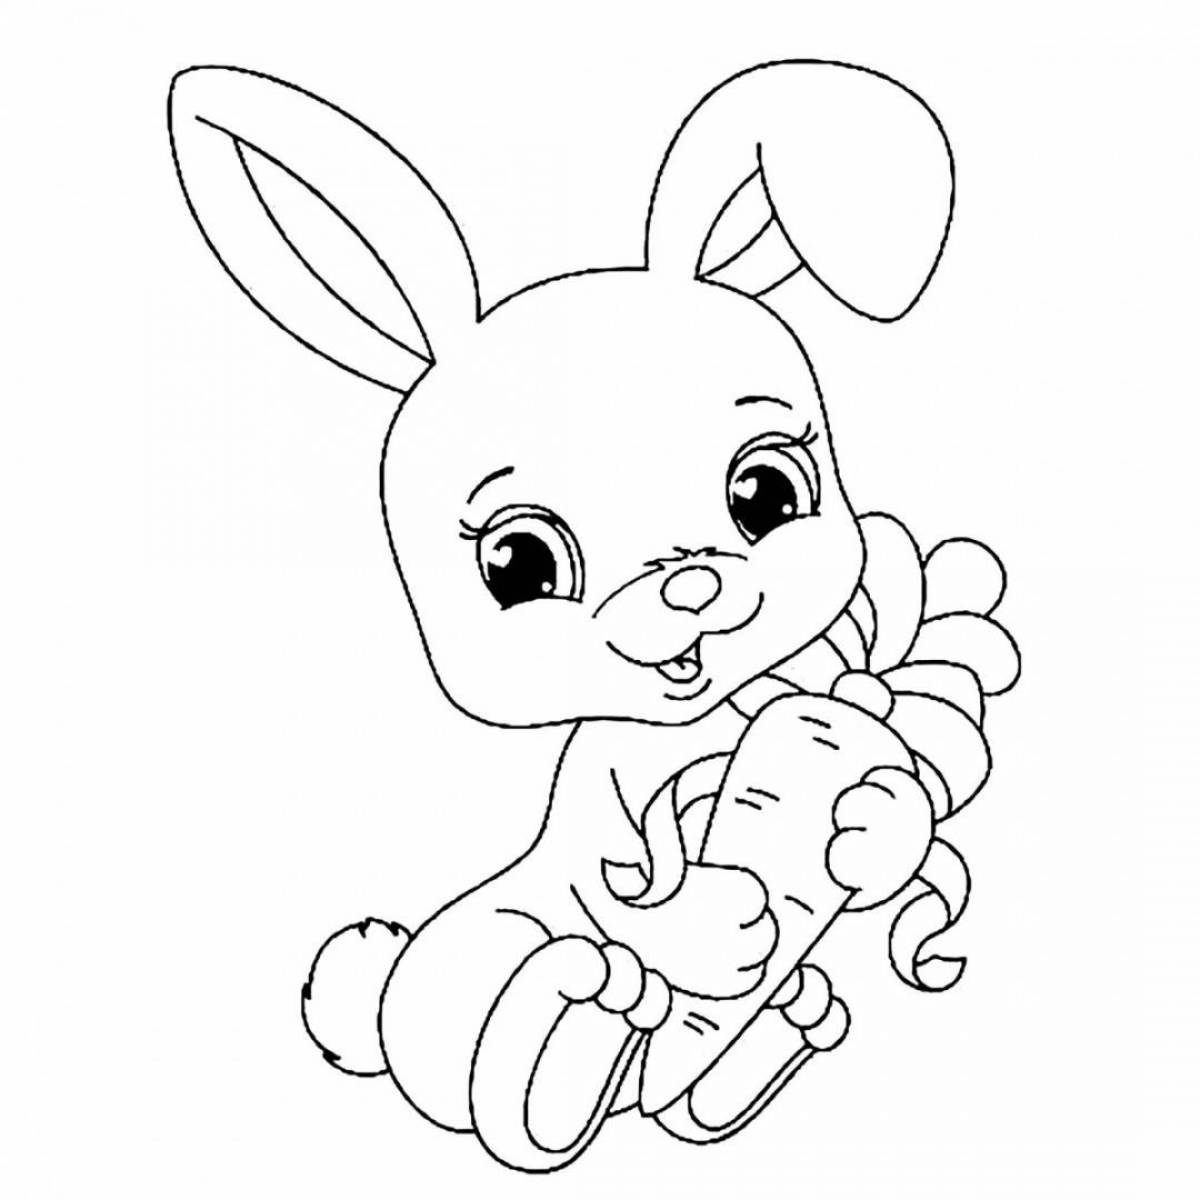 Live hare coloring book for kids